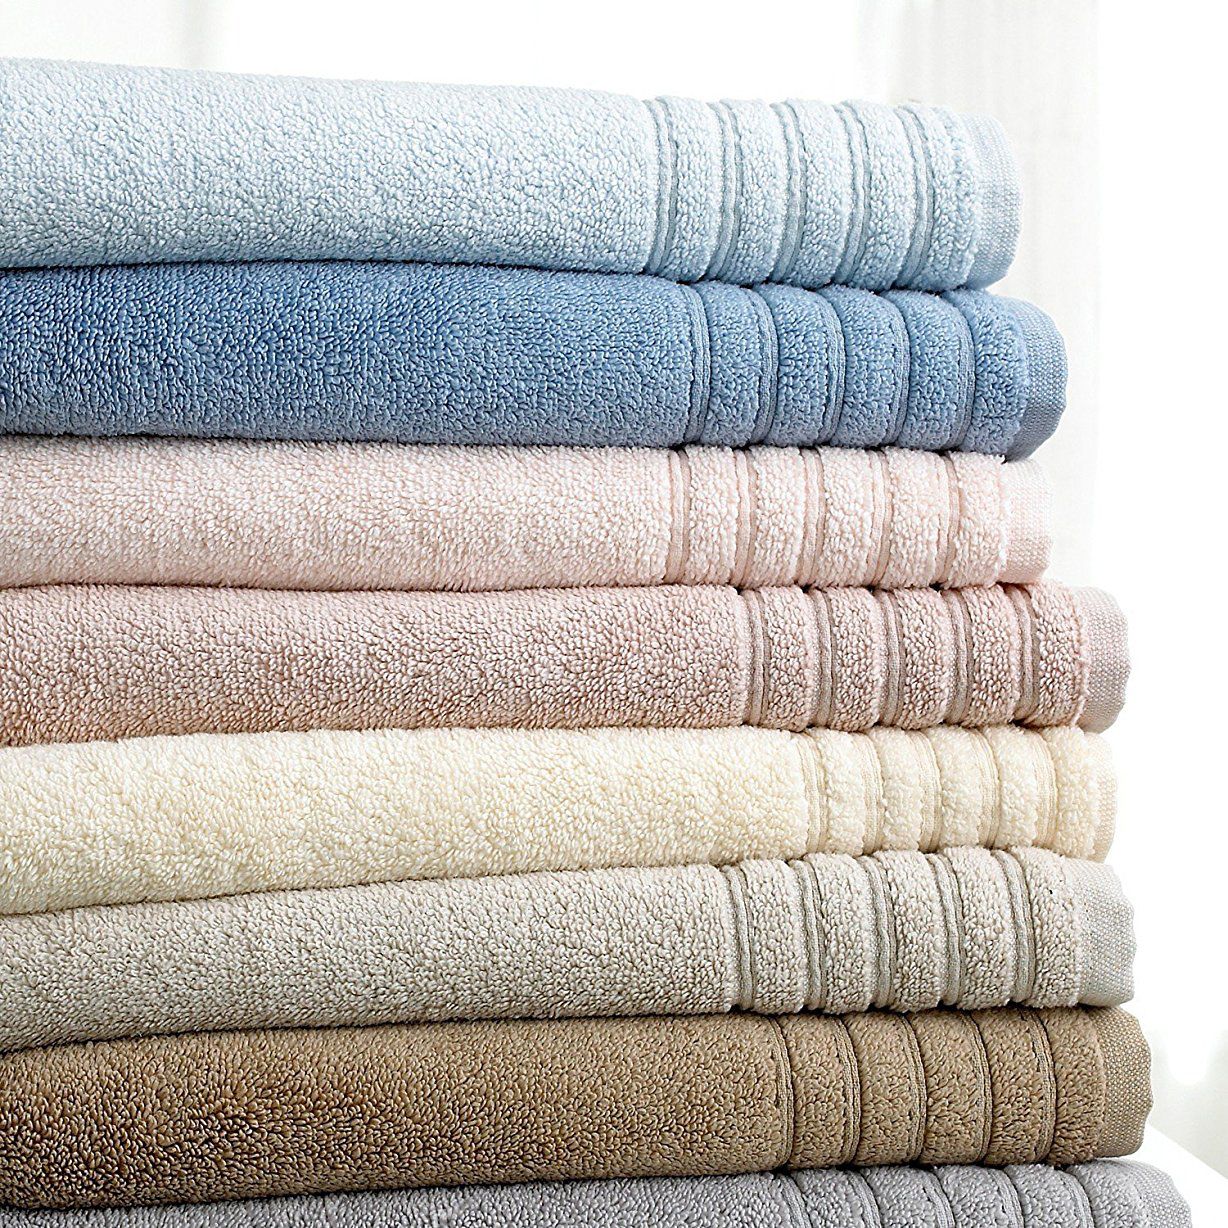 Hotel Collection Bath Towels - Macy's